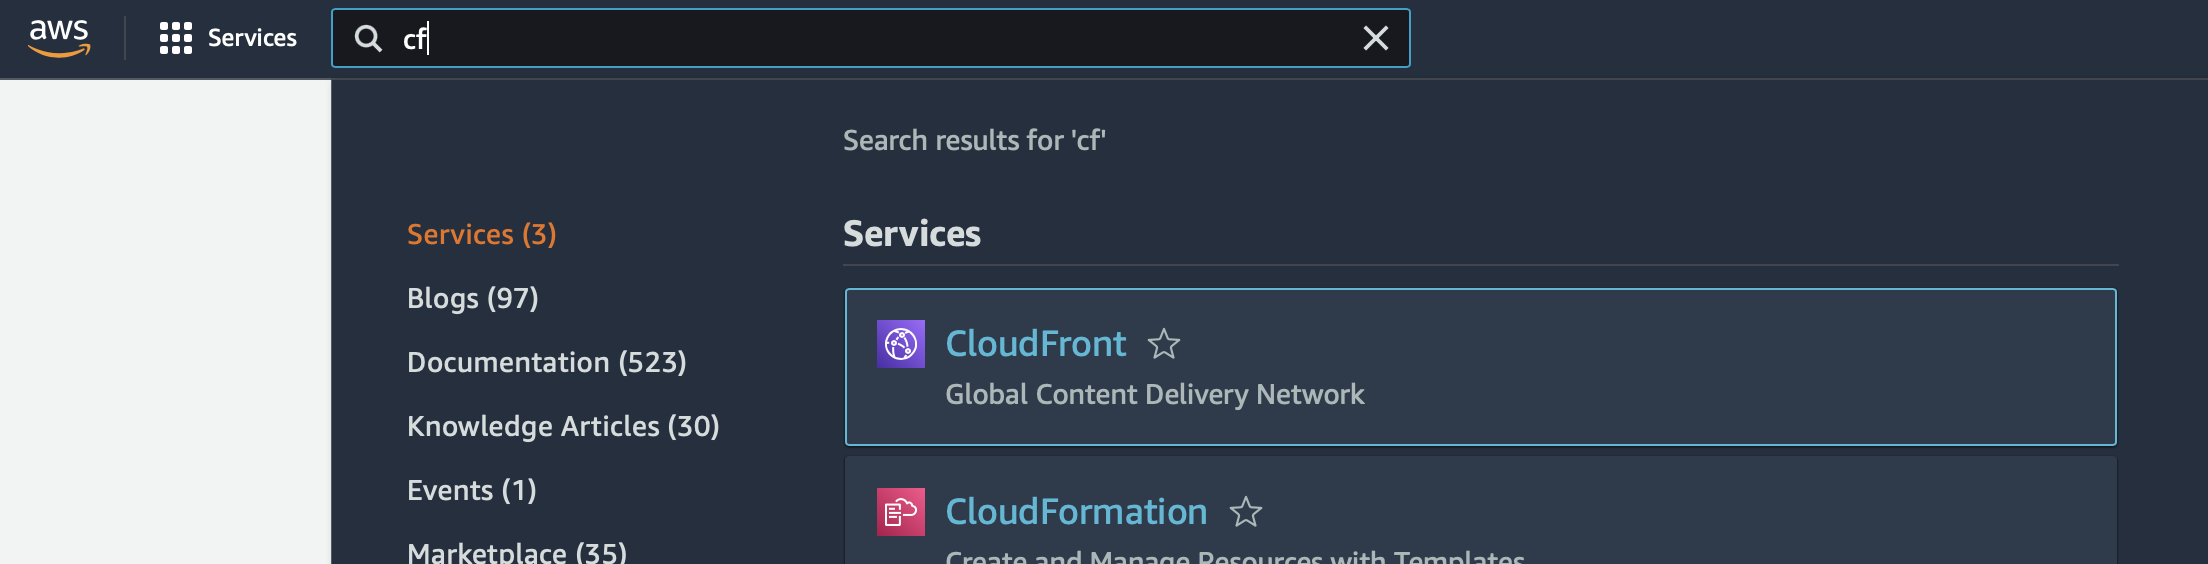 AWS Console CloudFront